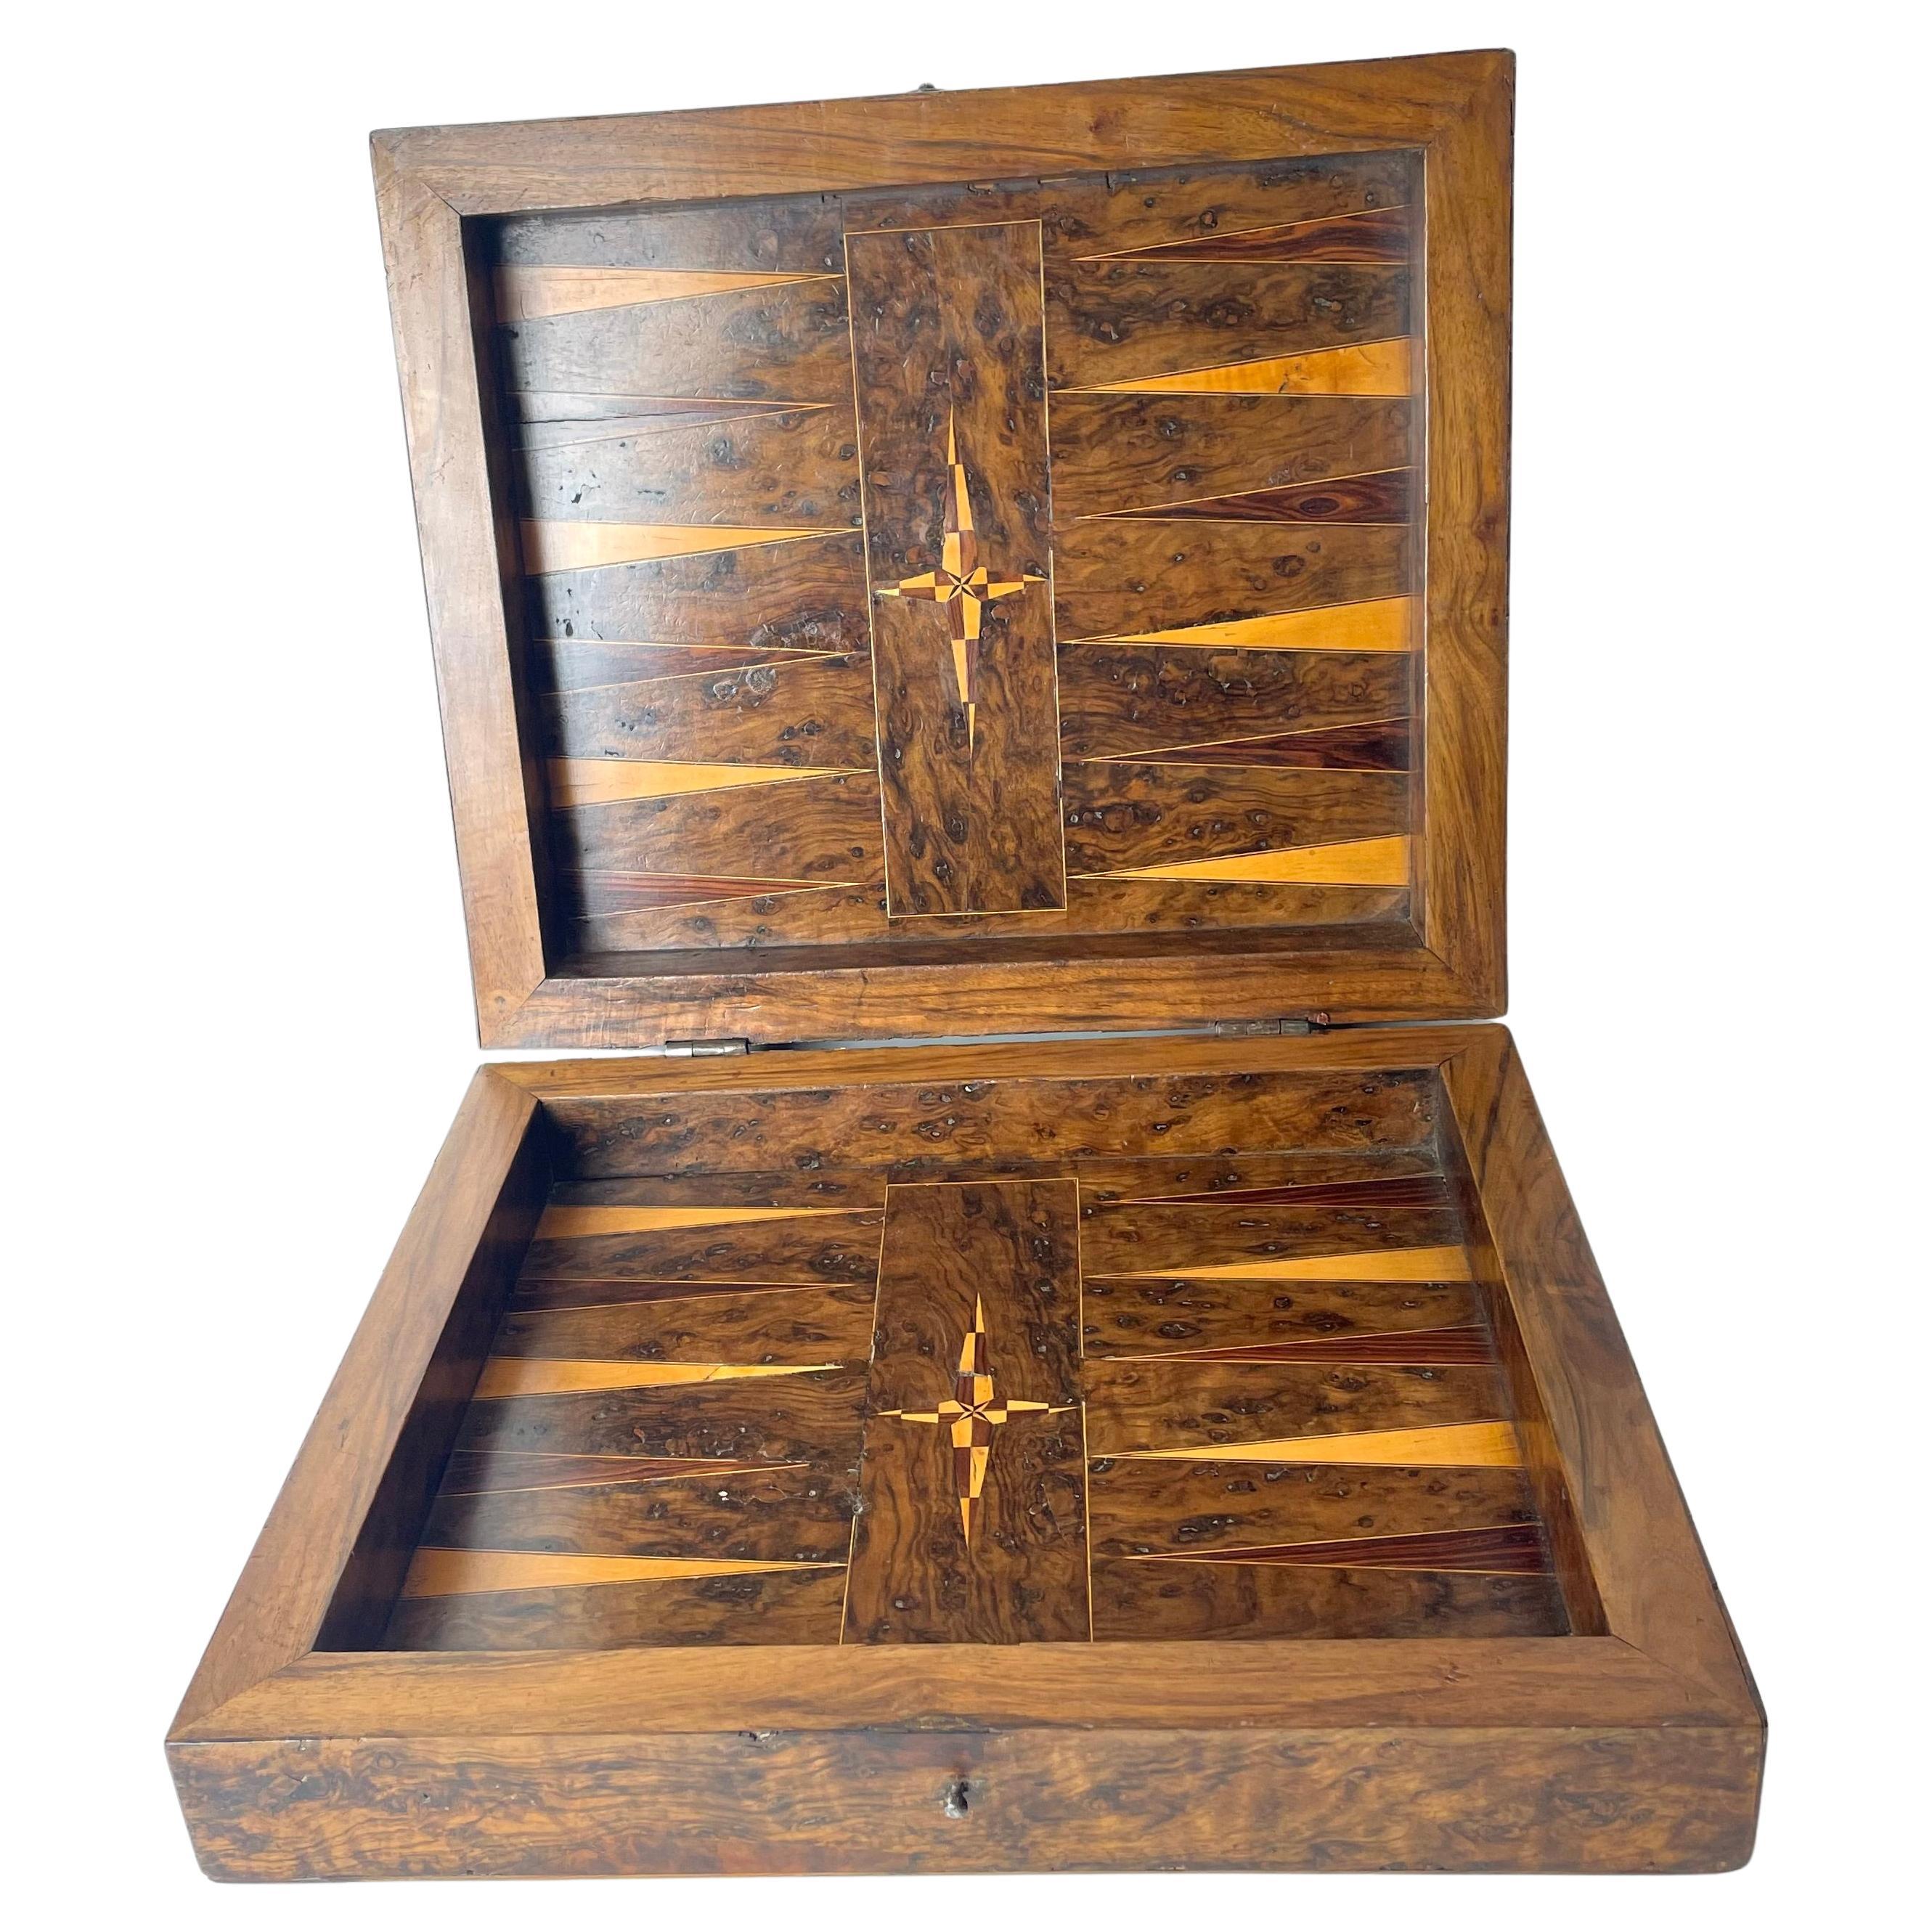 Late Baroque Games Box Chess Backgammon Decorated with Rich Wooden Interior.  